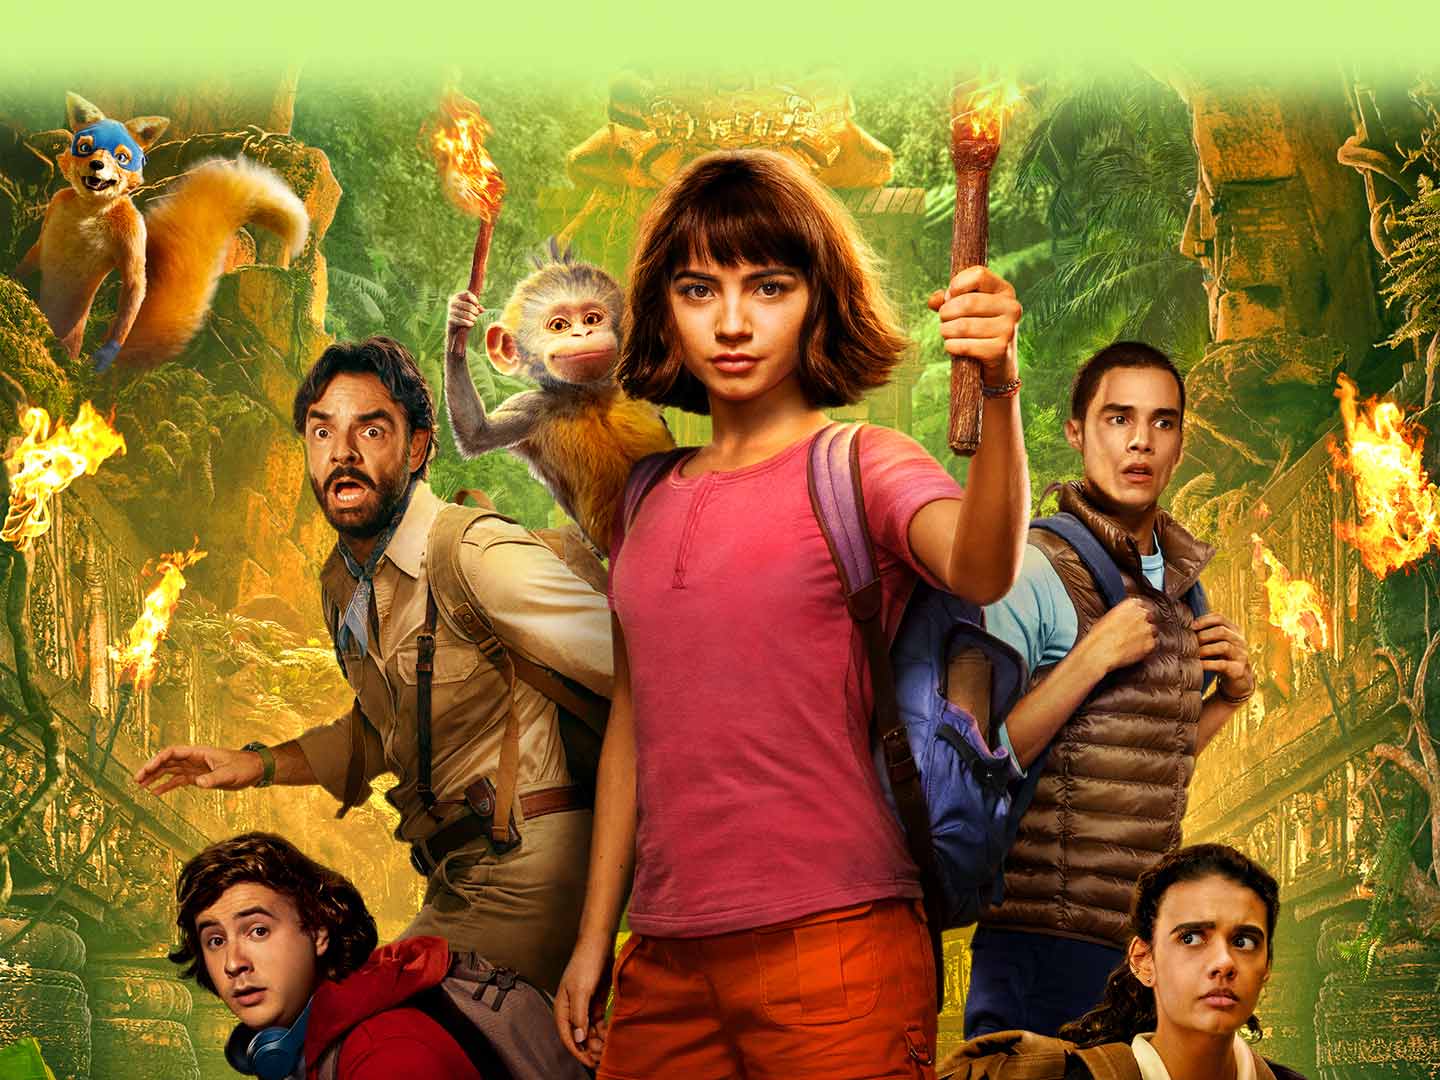 Free Family Film: Dora and the Lost City of Gold